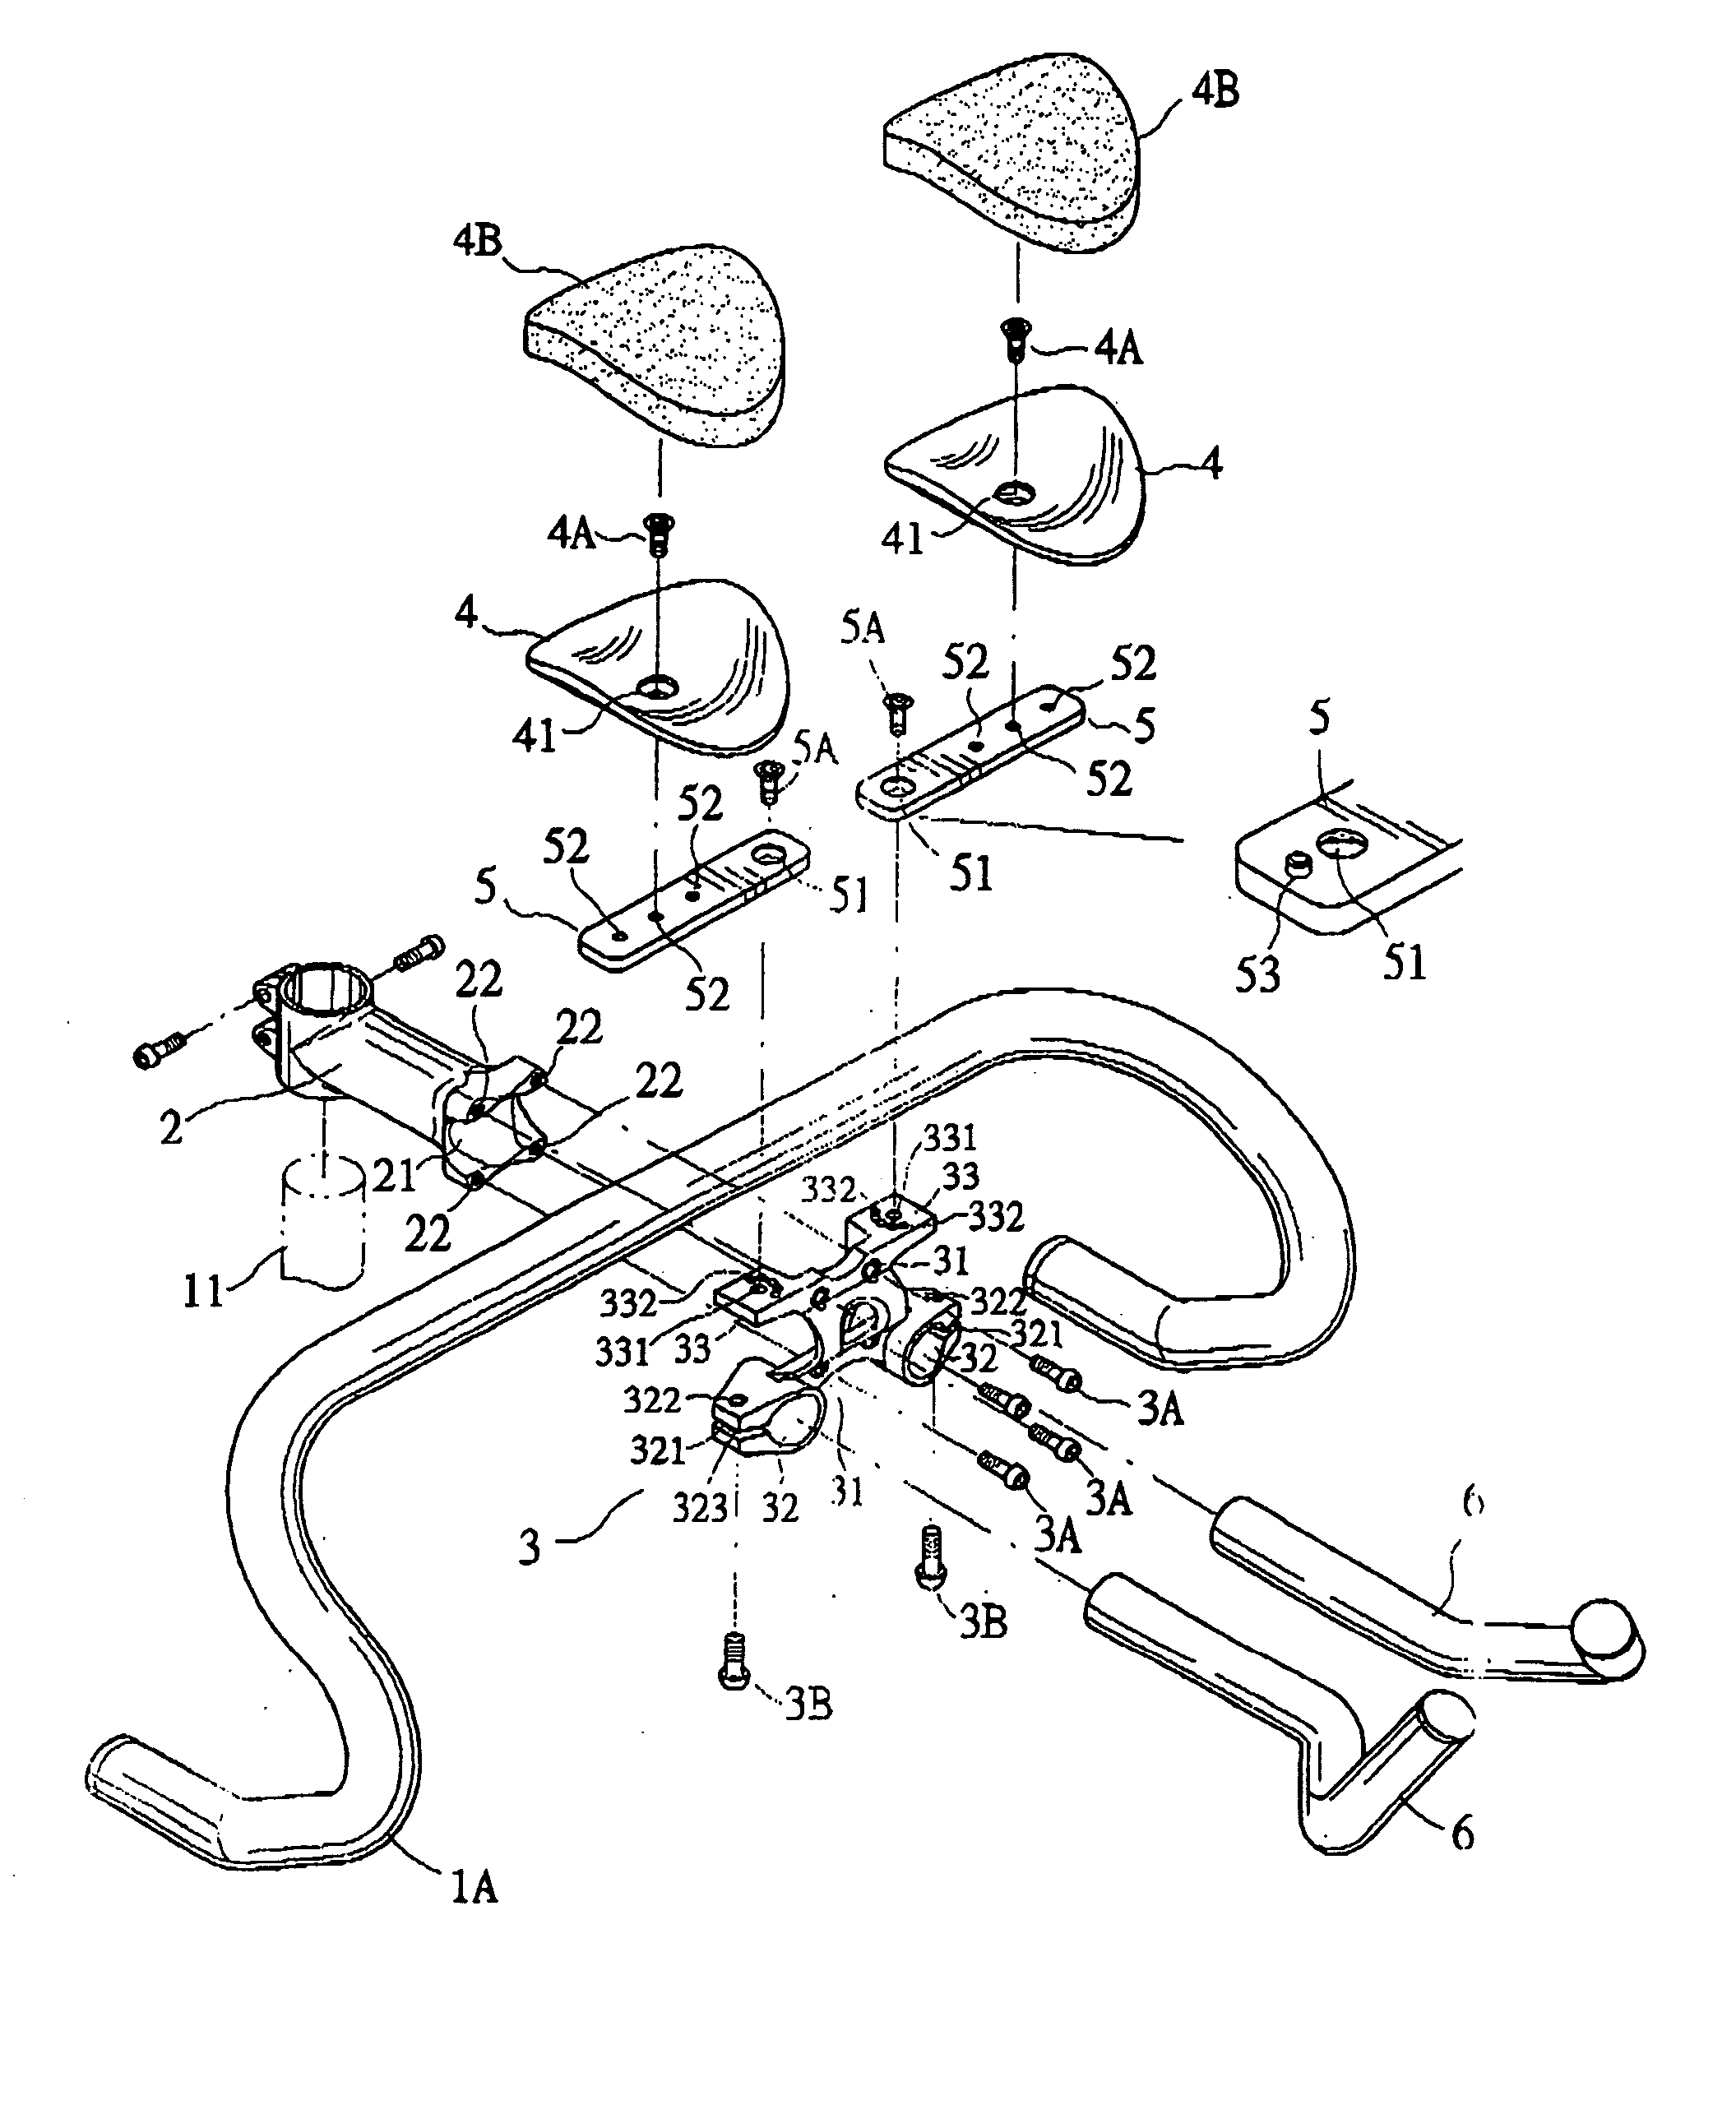 Clipping cover for the assembling of a bicycle handle accessories